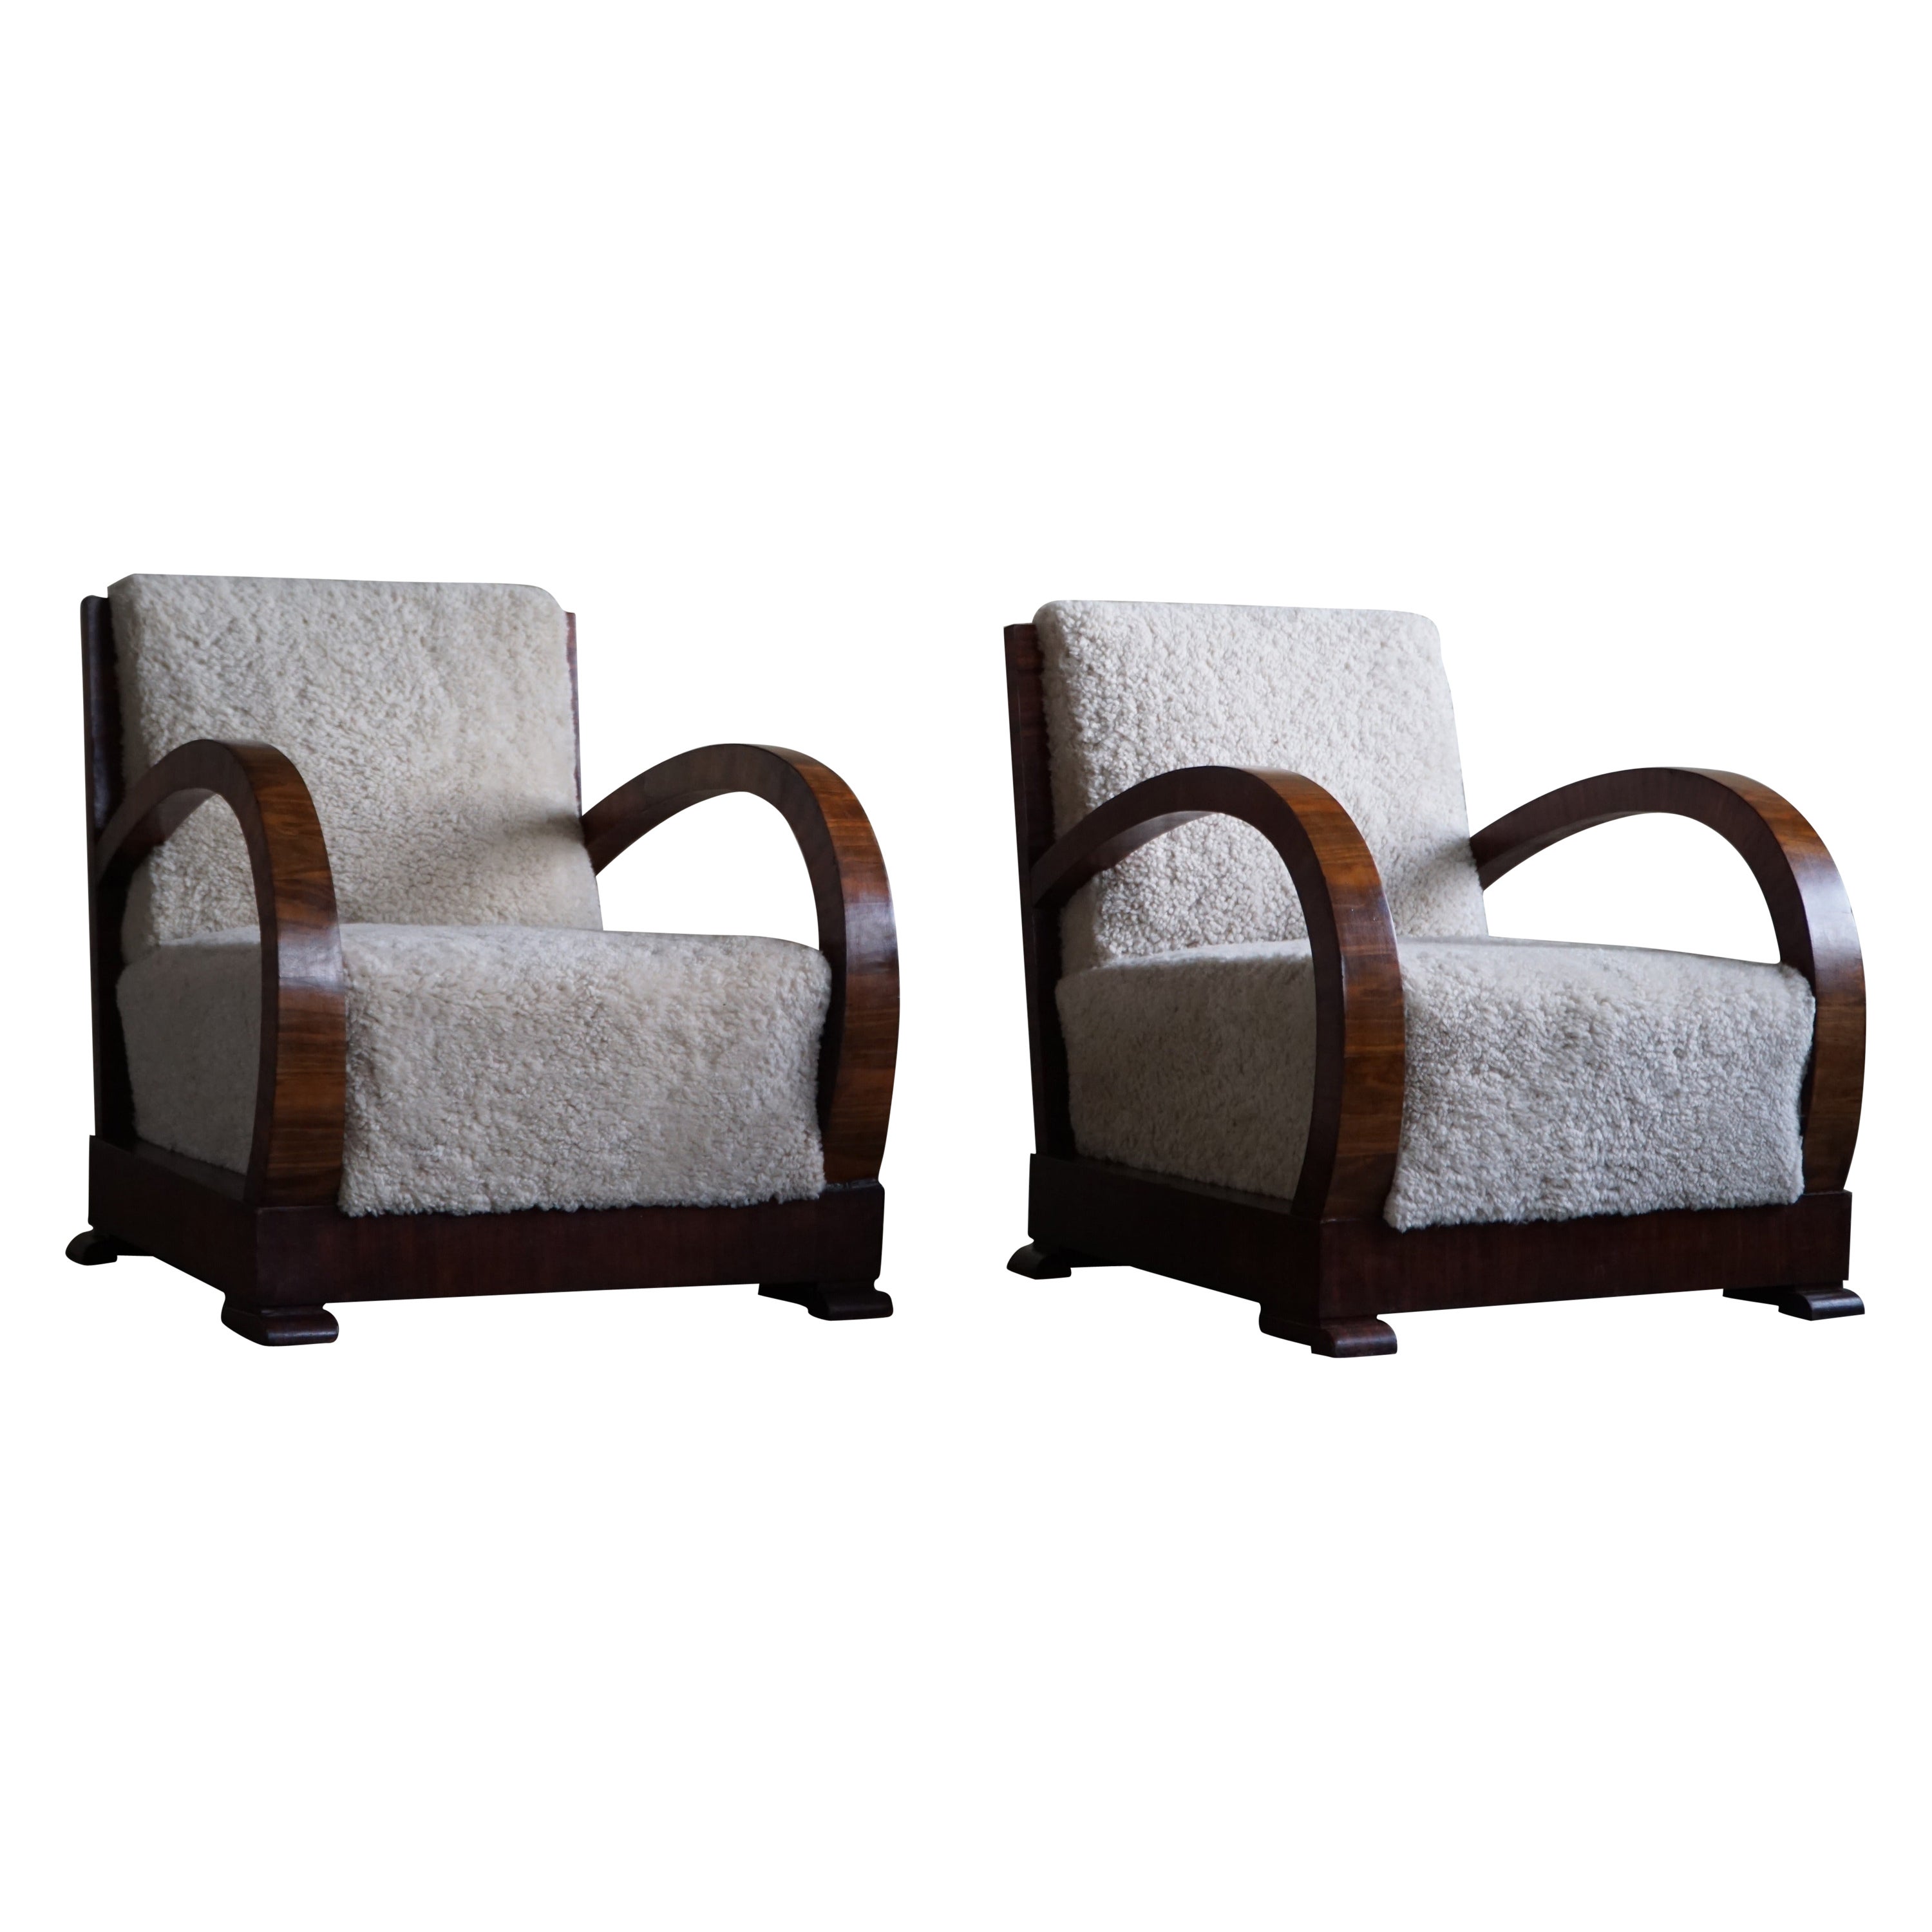 Pair of Danish Lounge Chairs, Reupholstered, Lambswool & Walnut, Art Deco, 1930s